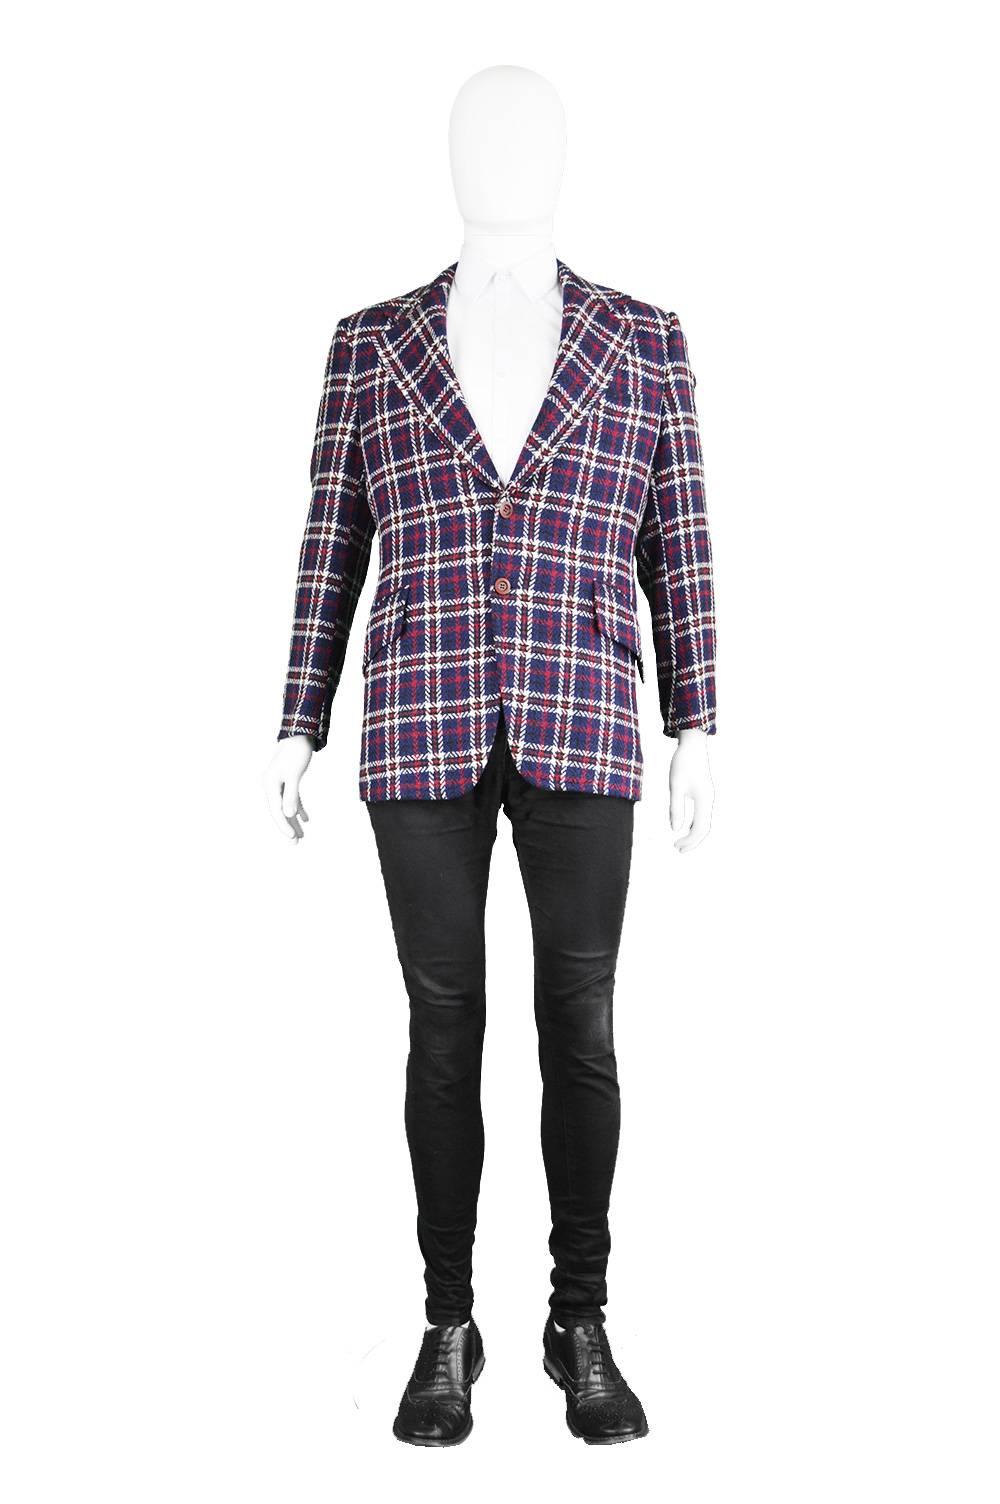 An incredible vintage men's checked wool blazer by Stix, Baer and Fuller, 1970s.  With wide, notched lapels and a vibrant check pattern on the front, this jacket is clearly influenced by the Carnaby Street styles of the time and adds a touch of